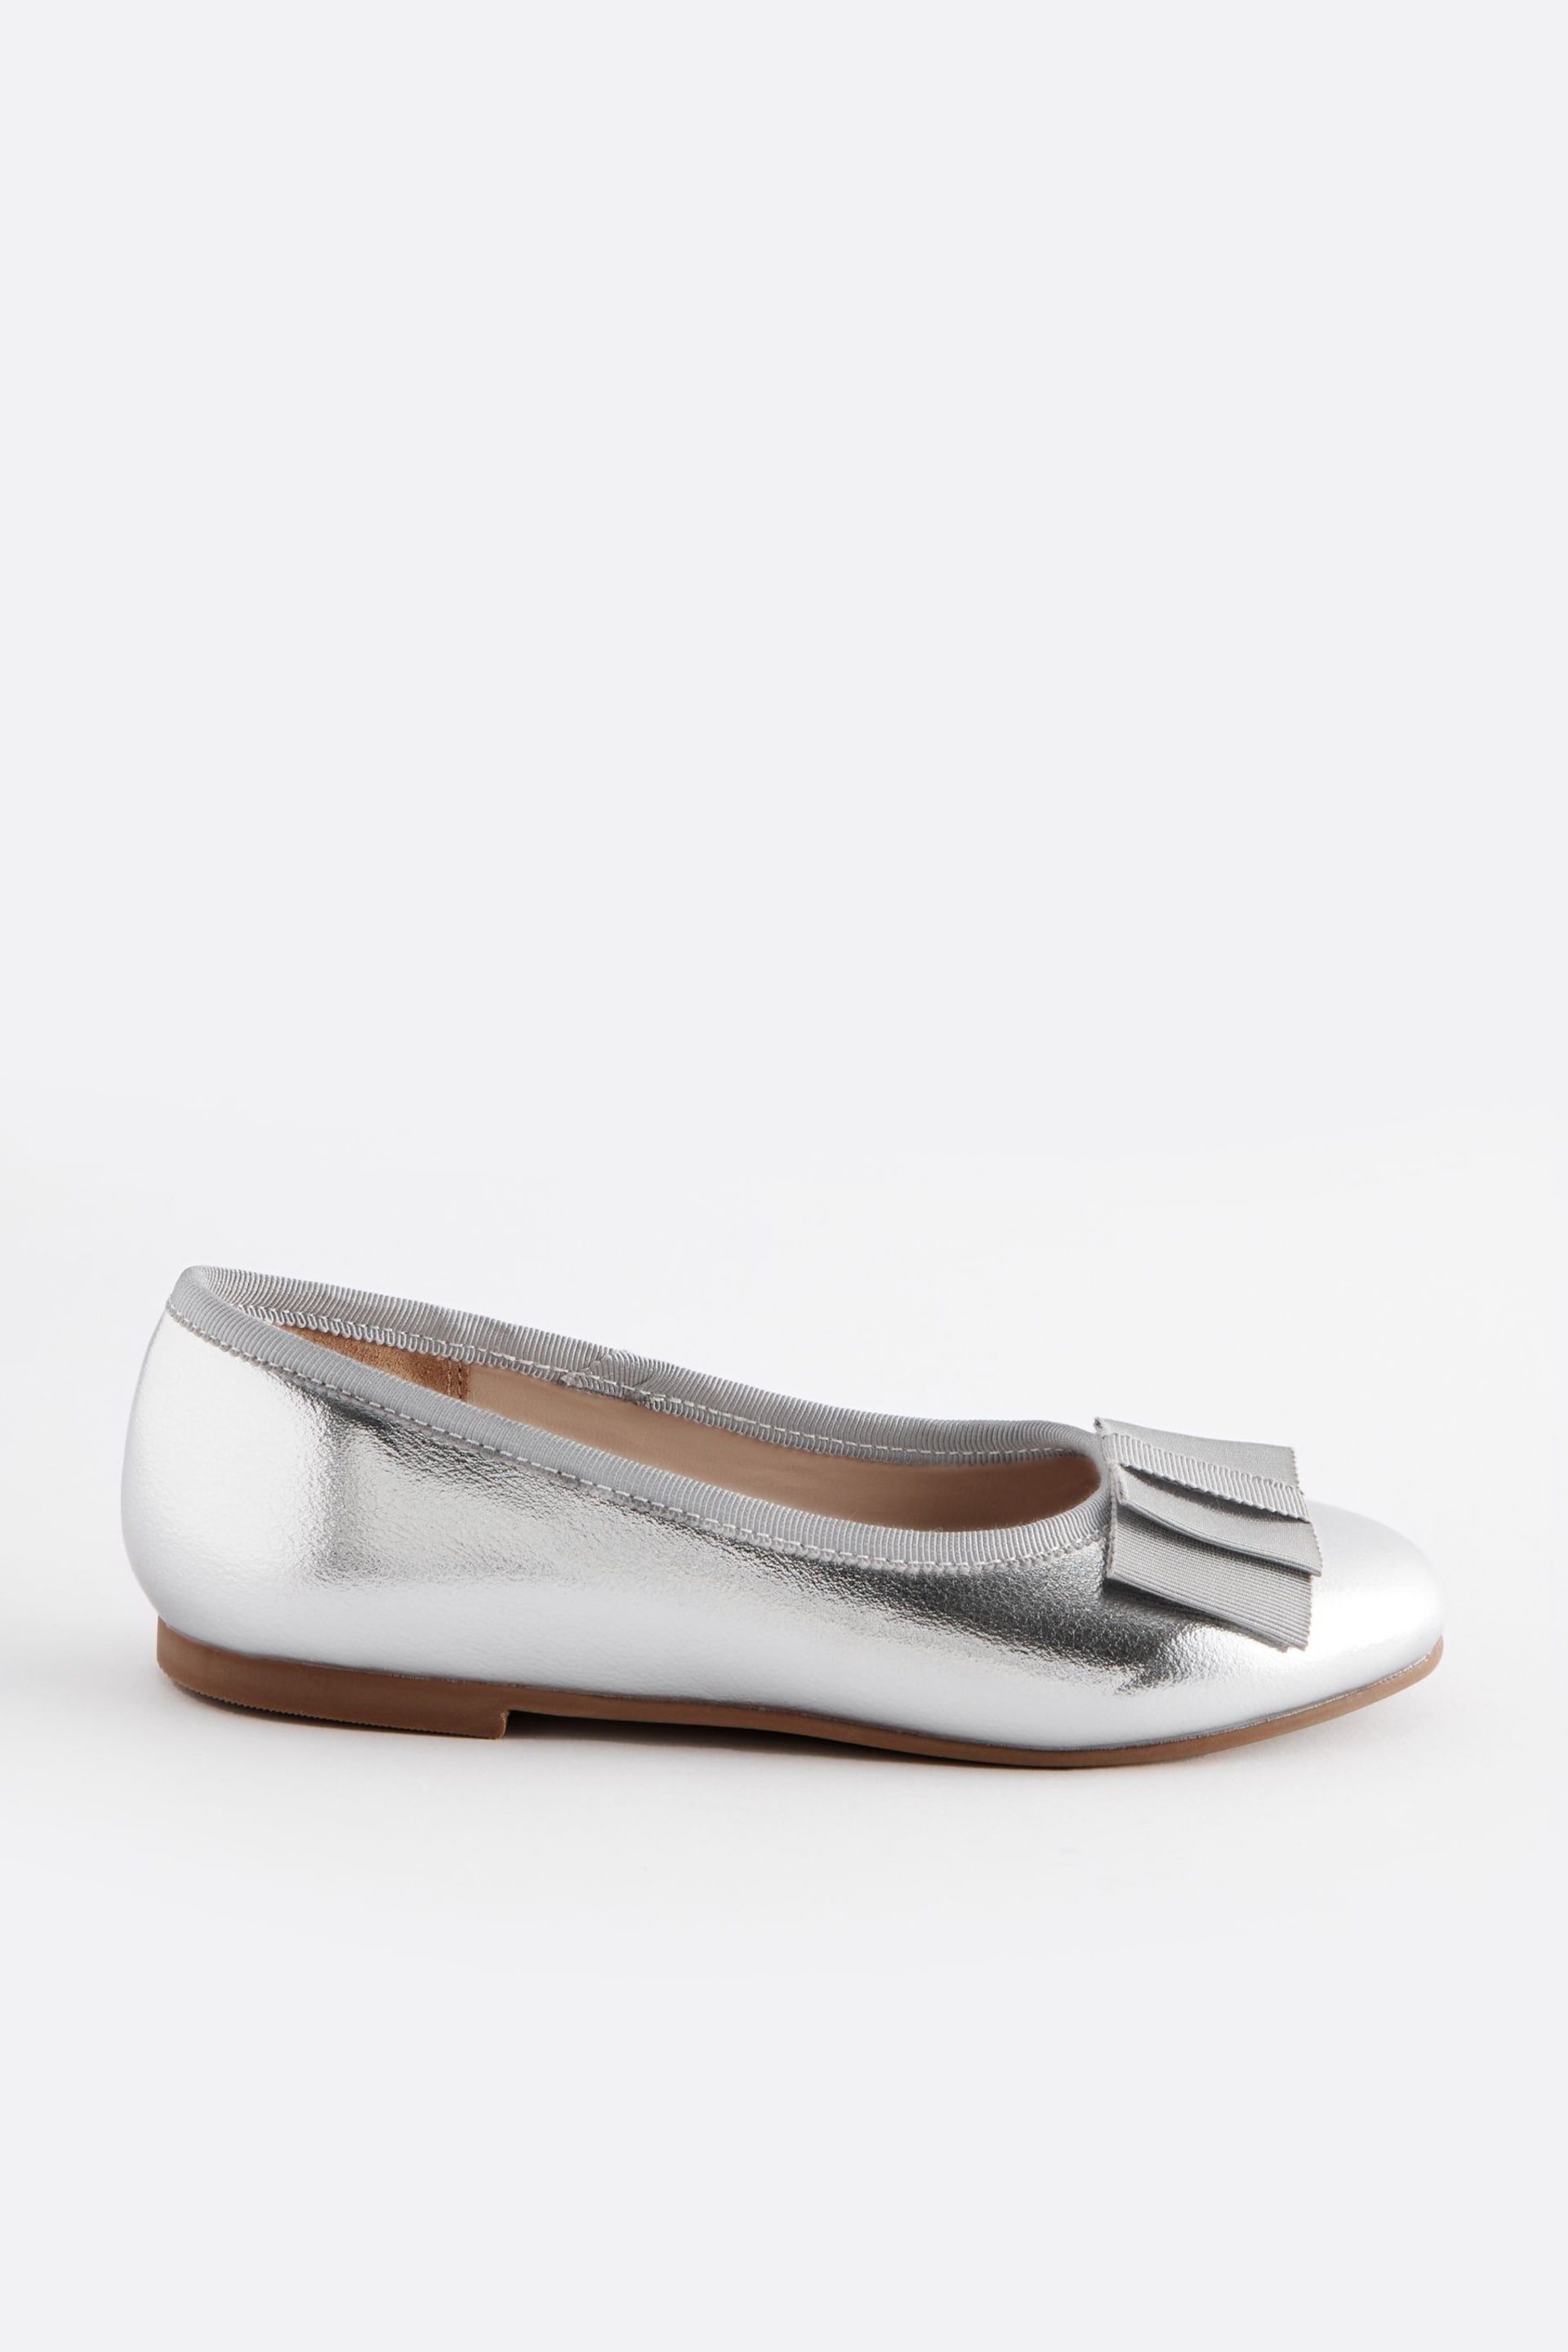 Silver Metallic Bow Occasion Ballerinas Shoes - Image 2 of 5